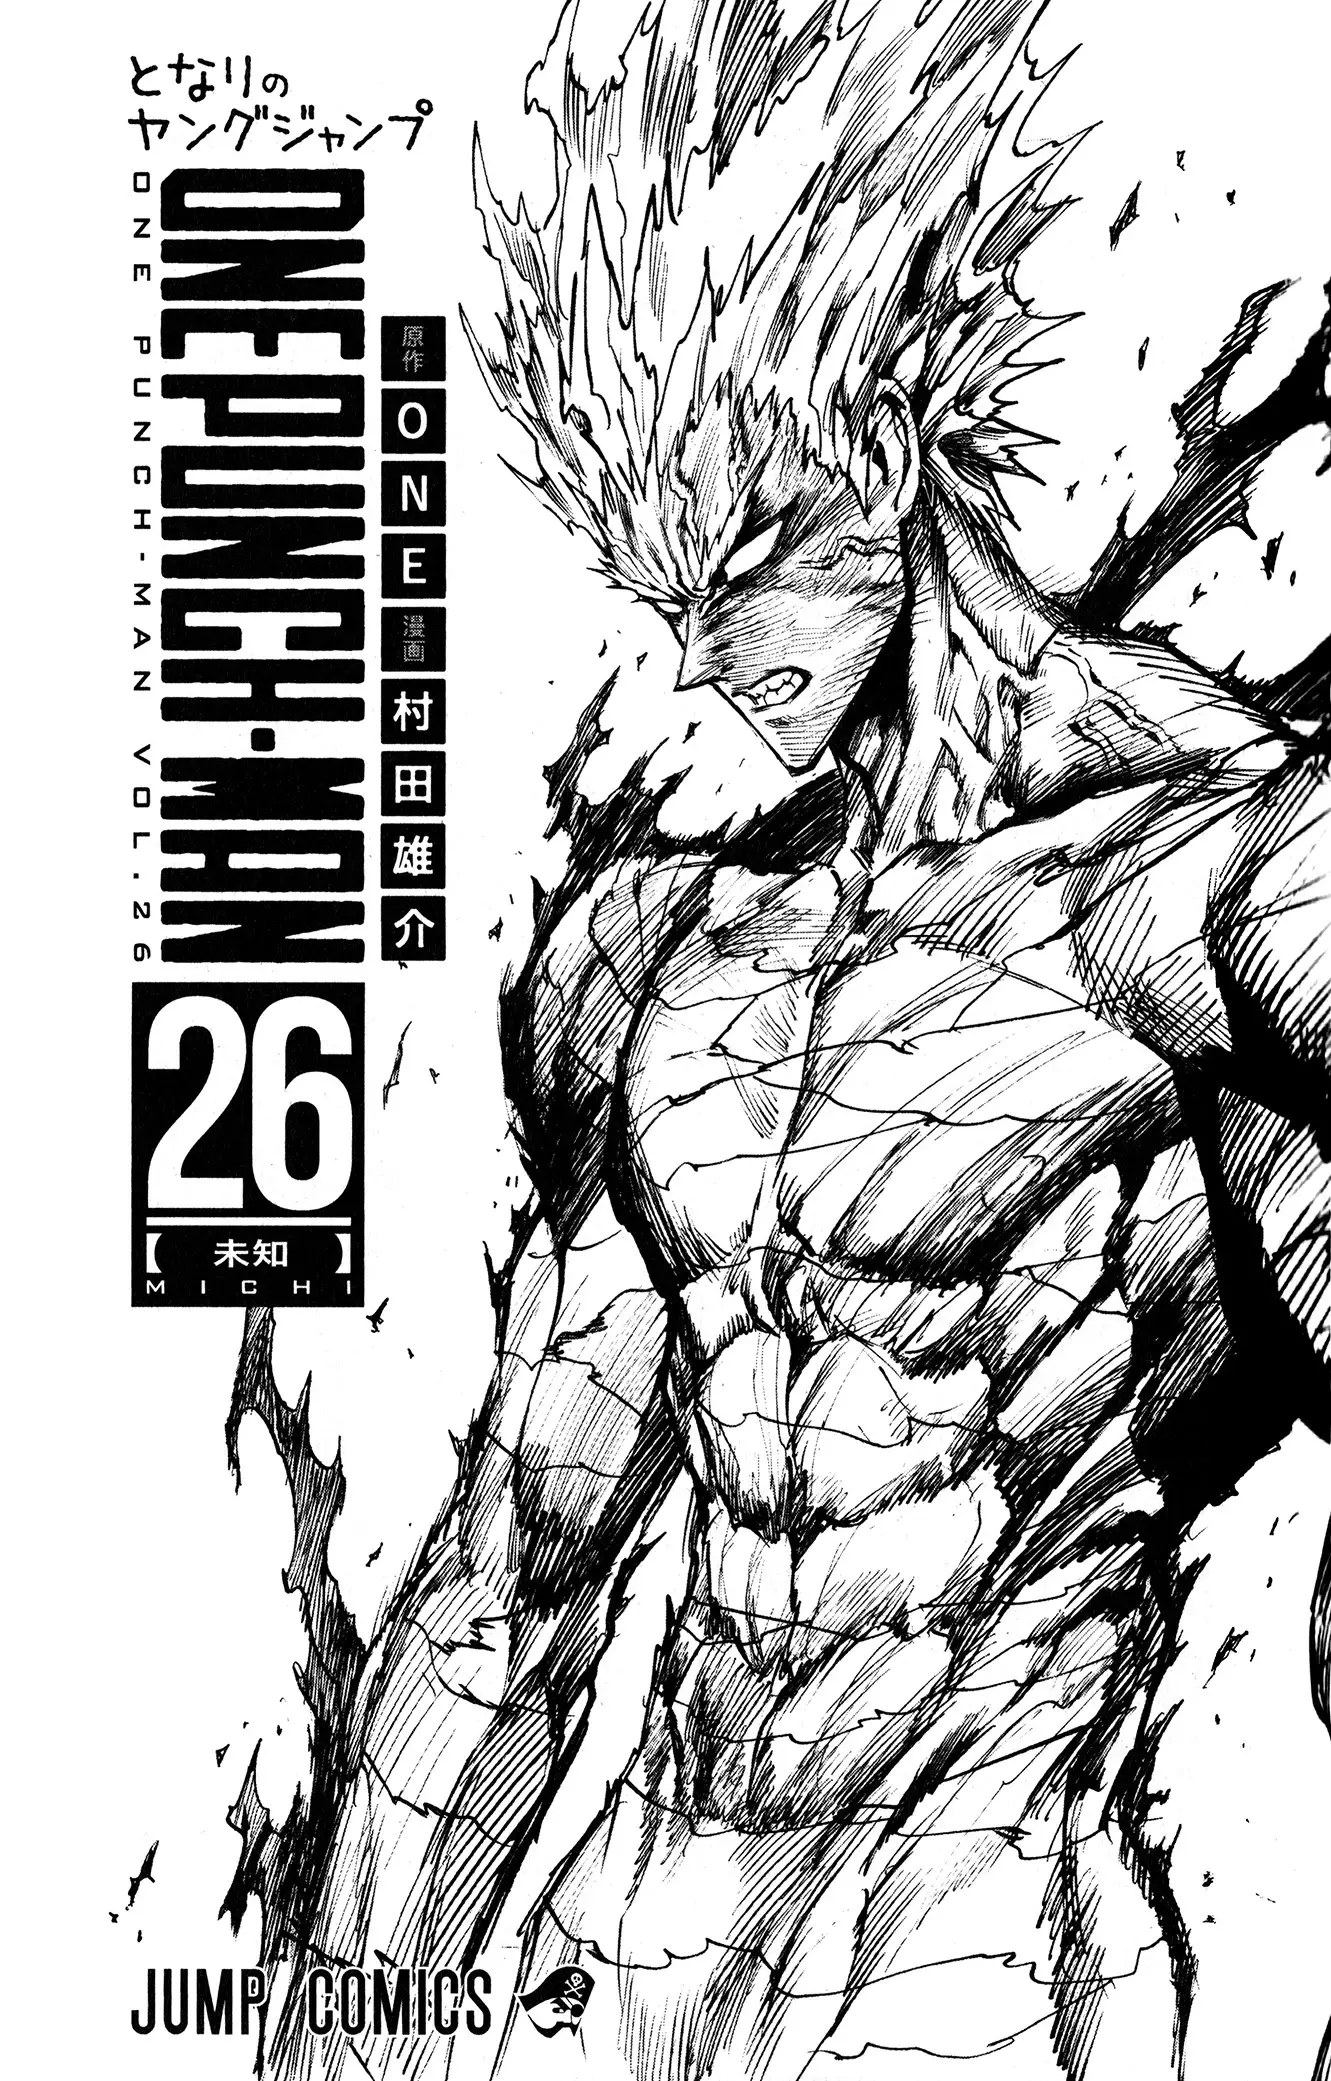 One Punch Man Chapter 167.5, READ One Punch Man Chapter 167.5 ONLINE, lost in the cloud genre,lost in the cloud gif,lost in the cloud girl,lost in the cloud goods,lost in the cloud goodreads,lost in the cloud,lost ark cloud gaming,lost odyssey cloud gaming,lost in the cloud fanart,lost in the cloud fanfic,lost in the cloud fandom,lost in the cloud first kiss,lost in the cloud font,lost in the cloud ending,lost in the cloud episode 97,lost in the cloud edit,lost in the cloud explained,lost in the cloud dog,lost in the cloud discord server,lost in the cloud desktop wallpaper,lost in the cloud drawing,can't find my cloud on network,lost in the cloud characters,lost in the cloud chapter 93 release date,lost in the cloud birthday,lost in the cloud birthday art,lost in the cloud background,lost in the cloud banner,lost in the clouds meaning,what is the black cloud in lost,lost in the cloud ao3,lost in the cloud anime,lost in the cloud art,lost in the cloud author twitter,lost in the cloud author instagram,lost in the cloud artist,lost in the cloud acrylic stand,lost in the cloud artist twitter,lost in the cloud art style,lost in the cloud analysis